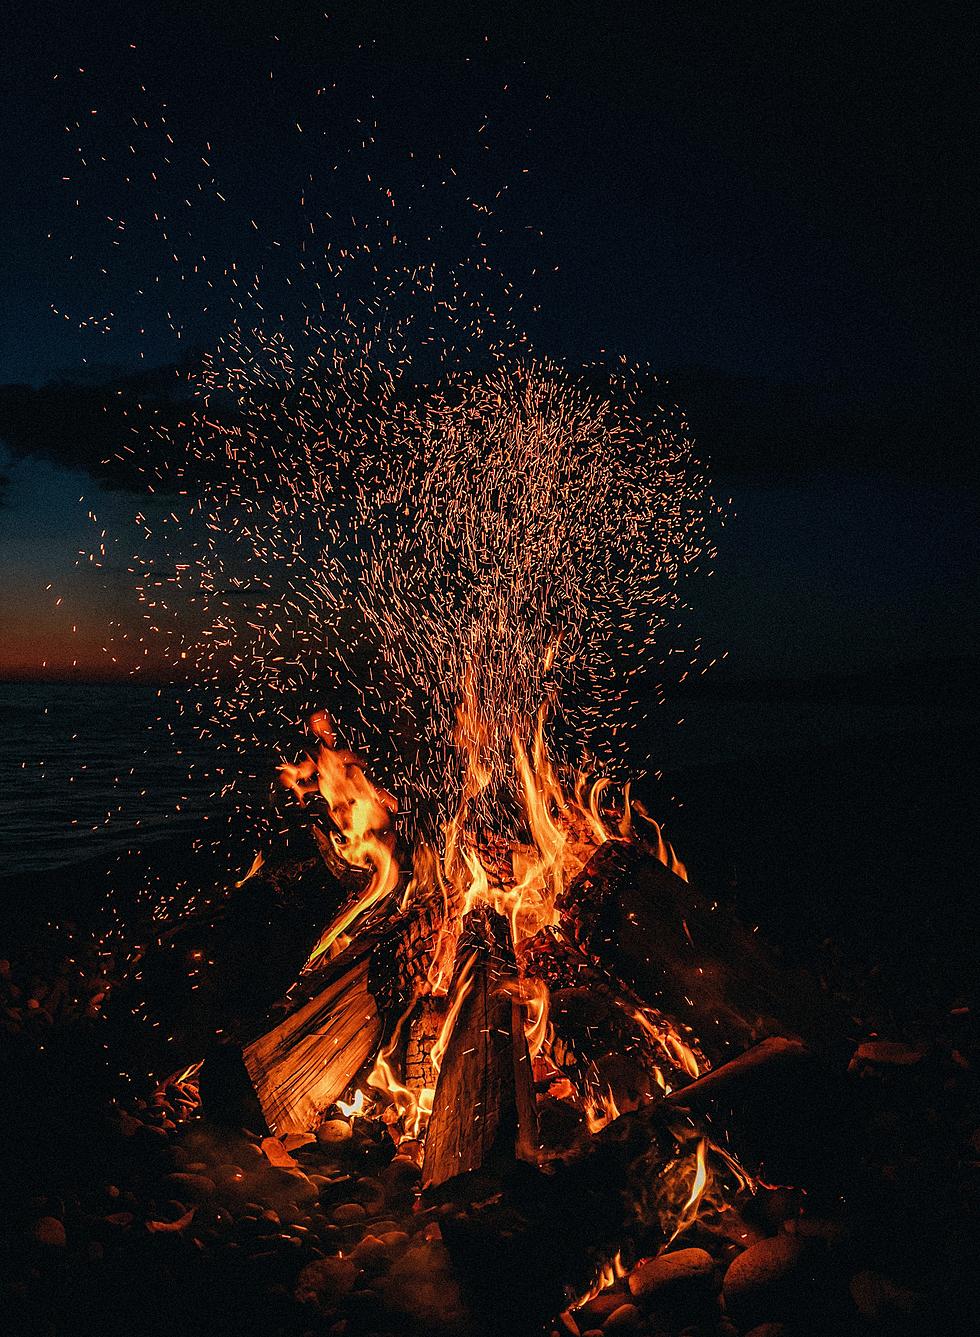 Did You Know It’s Illegal To Burn Trash In A Michigan Bonfire?